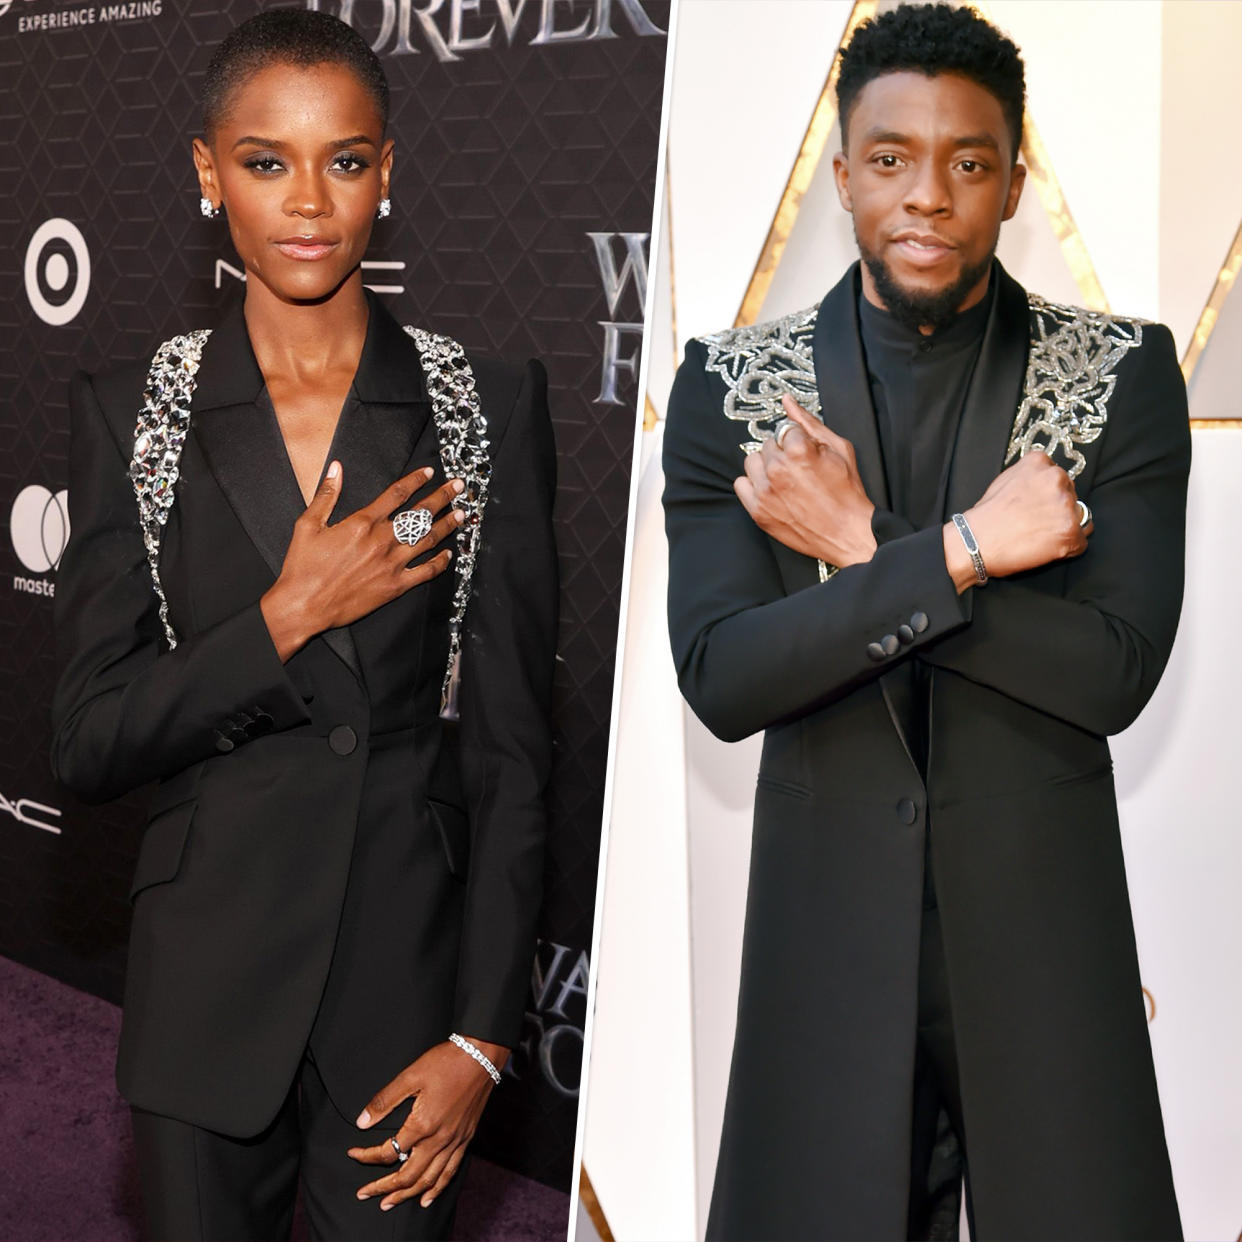 Letitia Wright honors the late Chadwick Boseman at the 